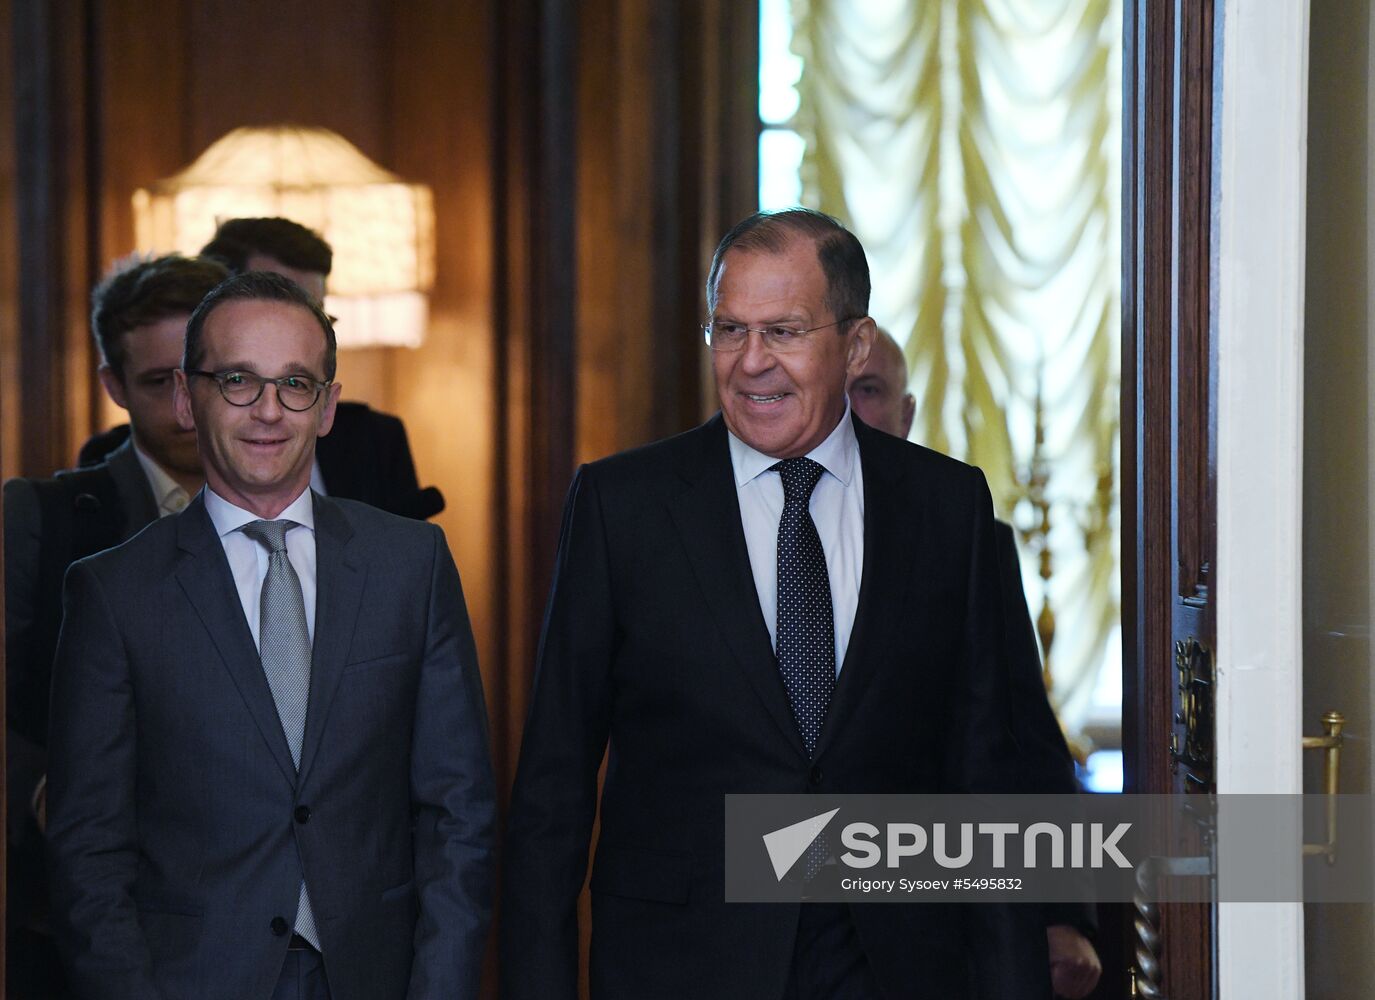 Russian Foreign Minister Sergei Lavrov meets with German Foreign Minister Heiko Maas